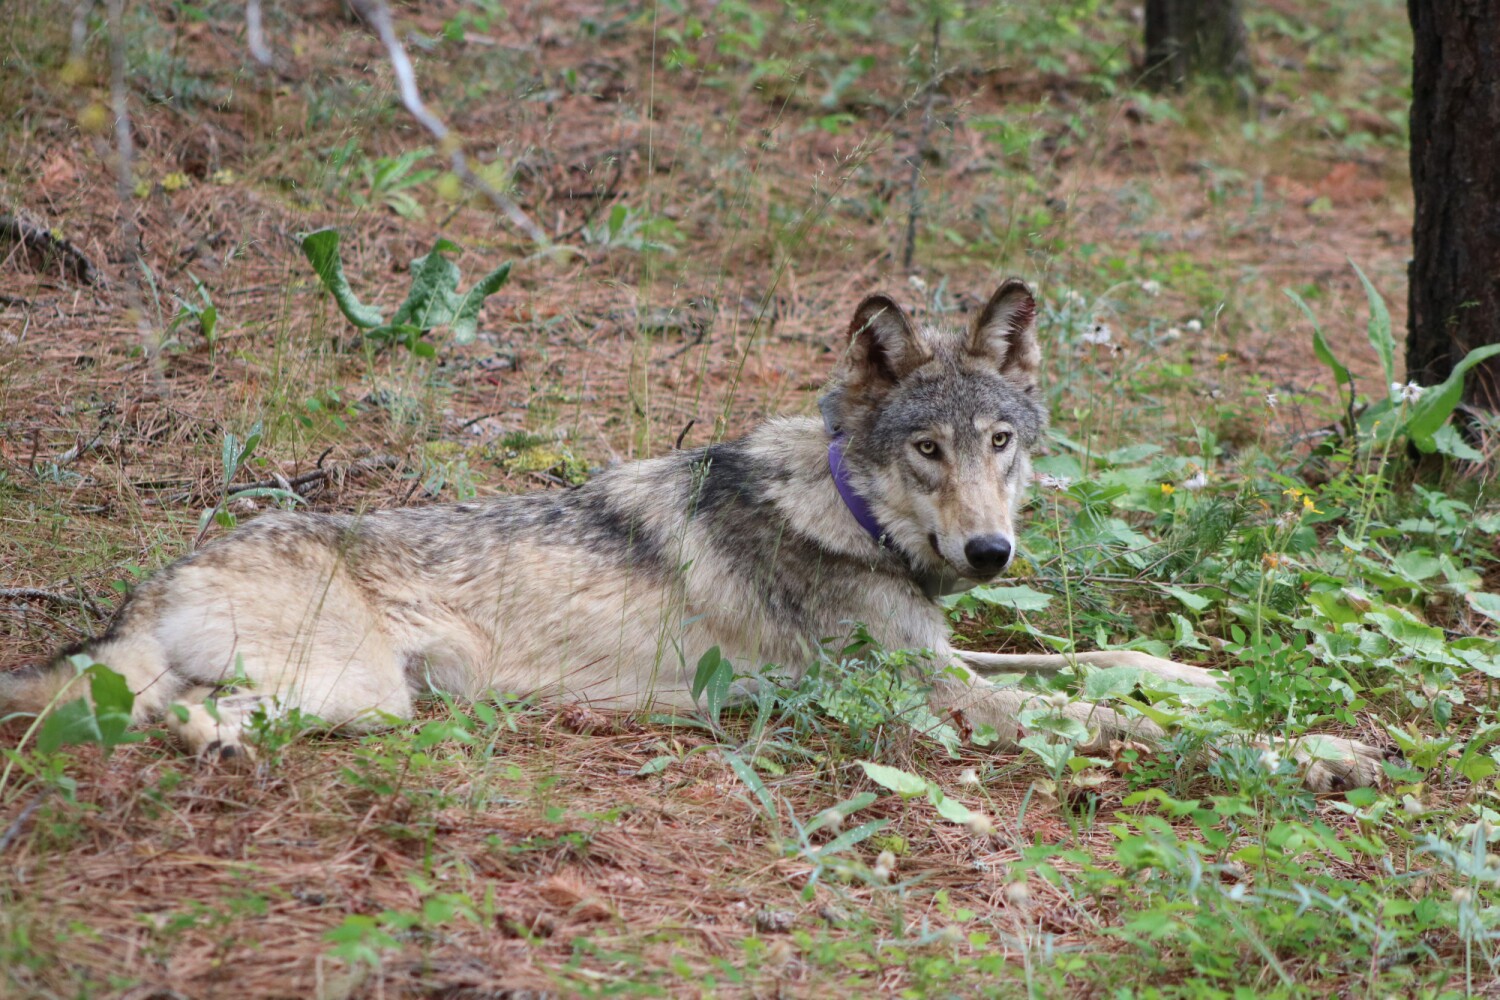 A rare gray wolf trekked from Oregon to California's Central Sierra. Not everyone is thrilled 